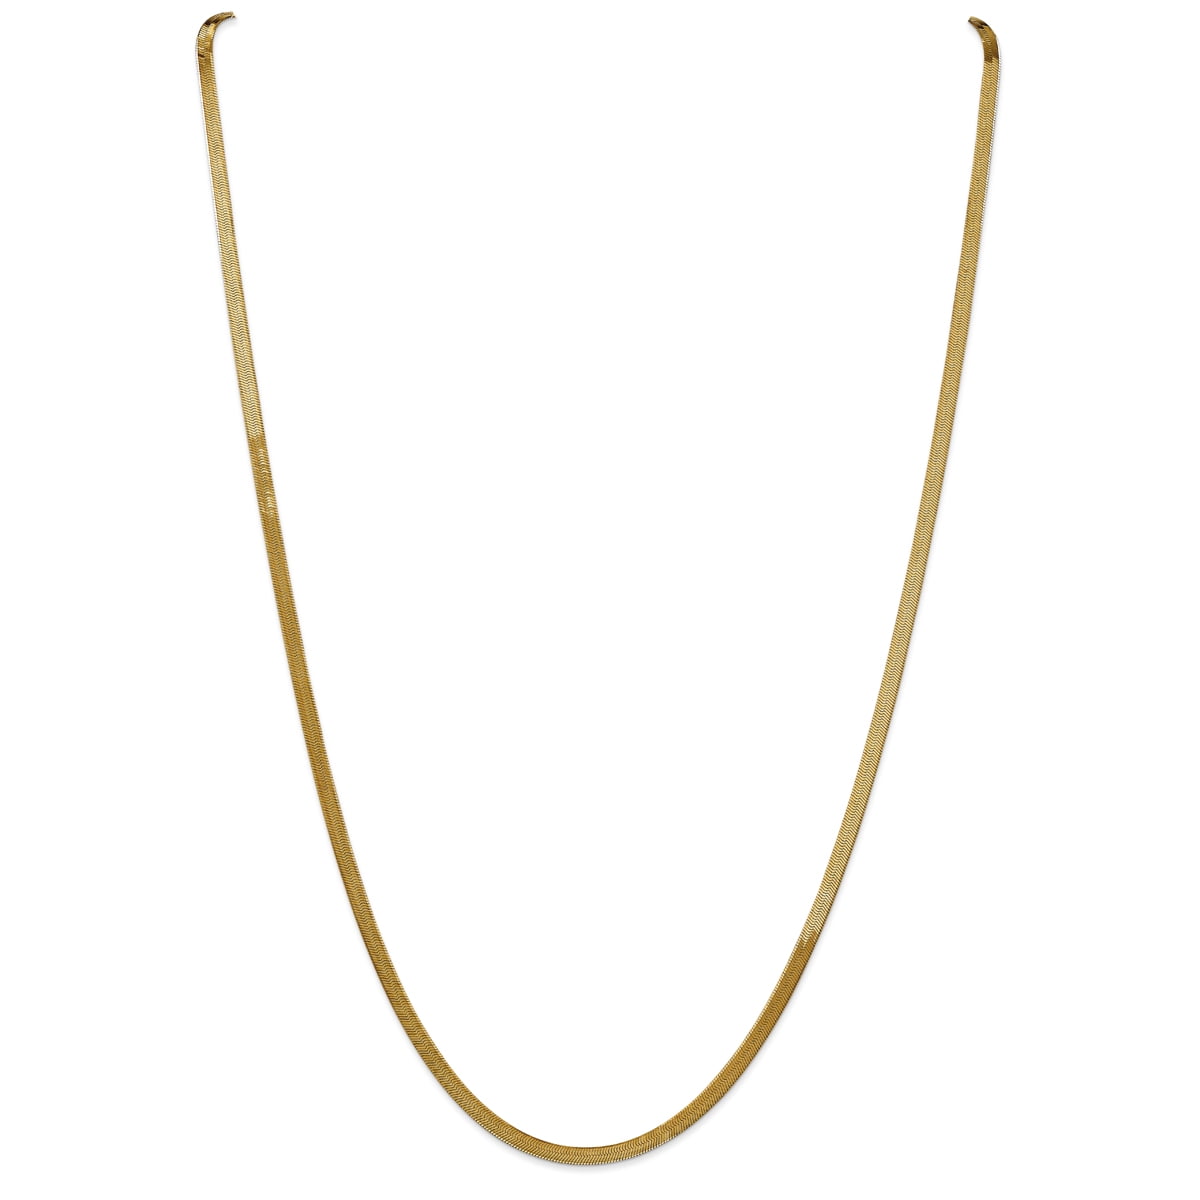 IcedTime 14K Yellow Gold 1.1mm wide Diamond Cut Milano Chain with Lobster Clasp